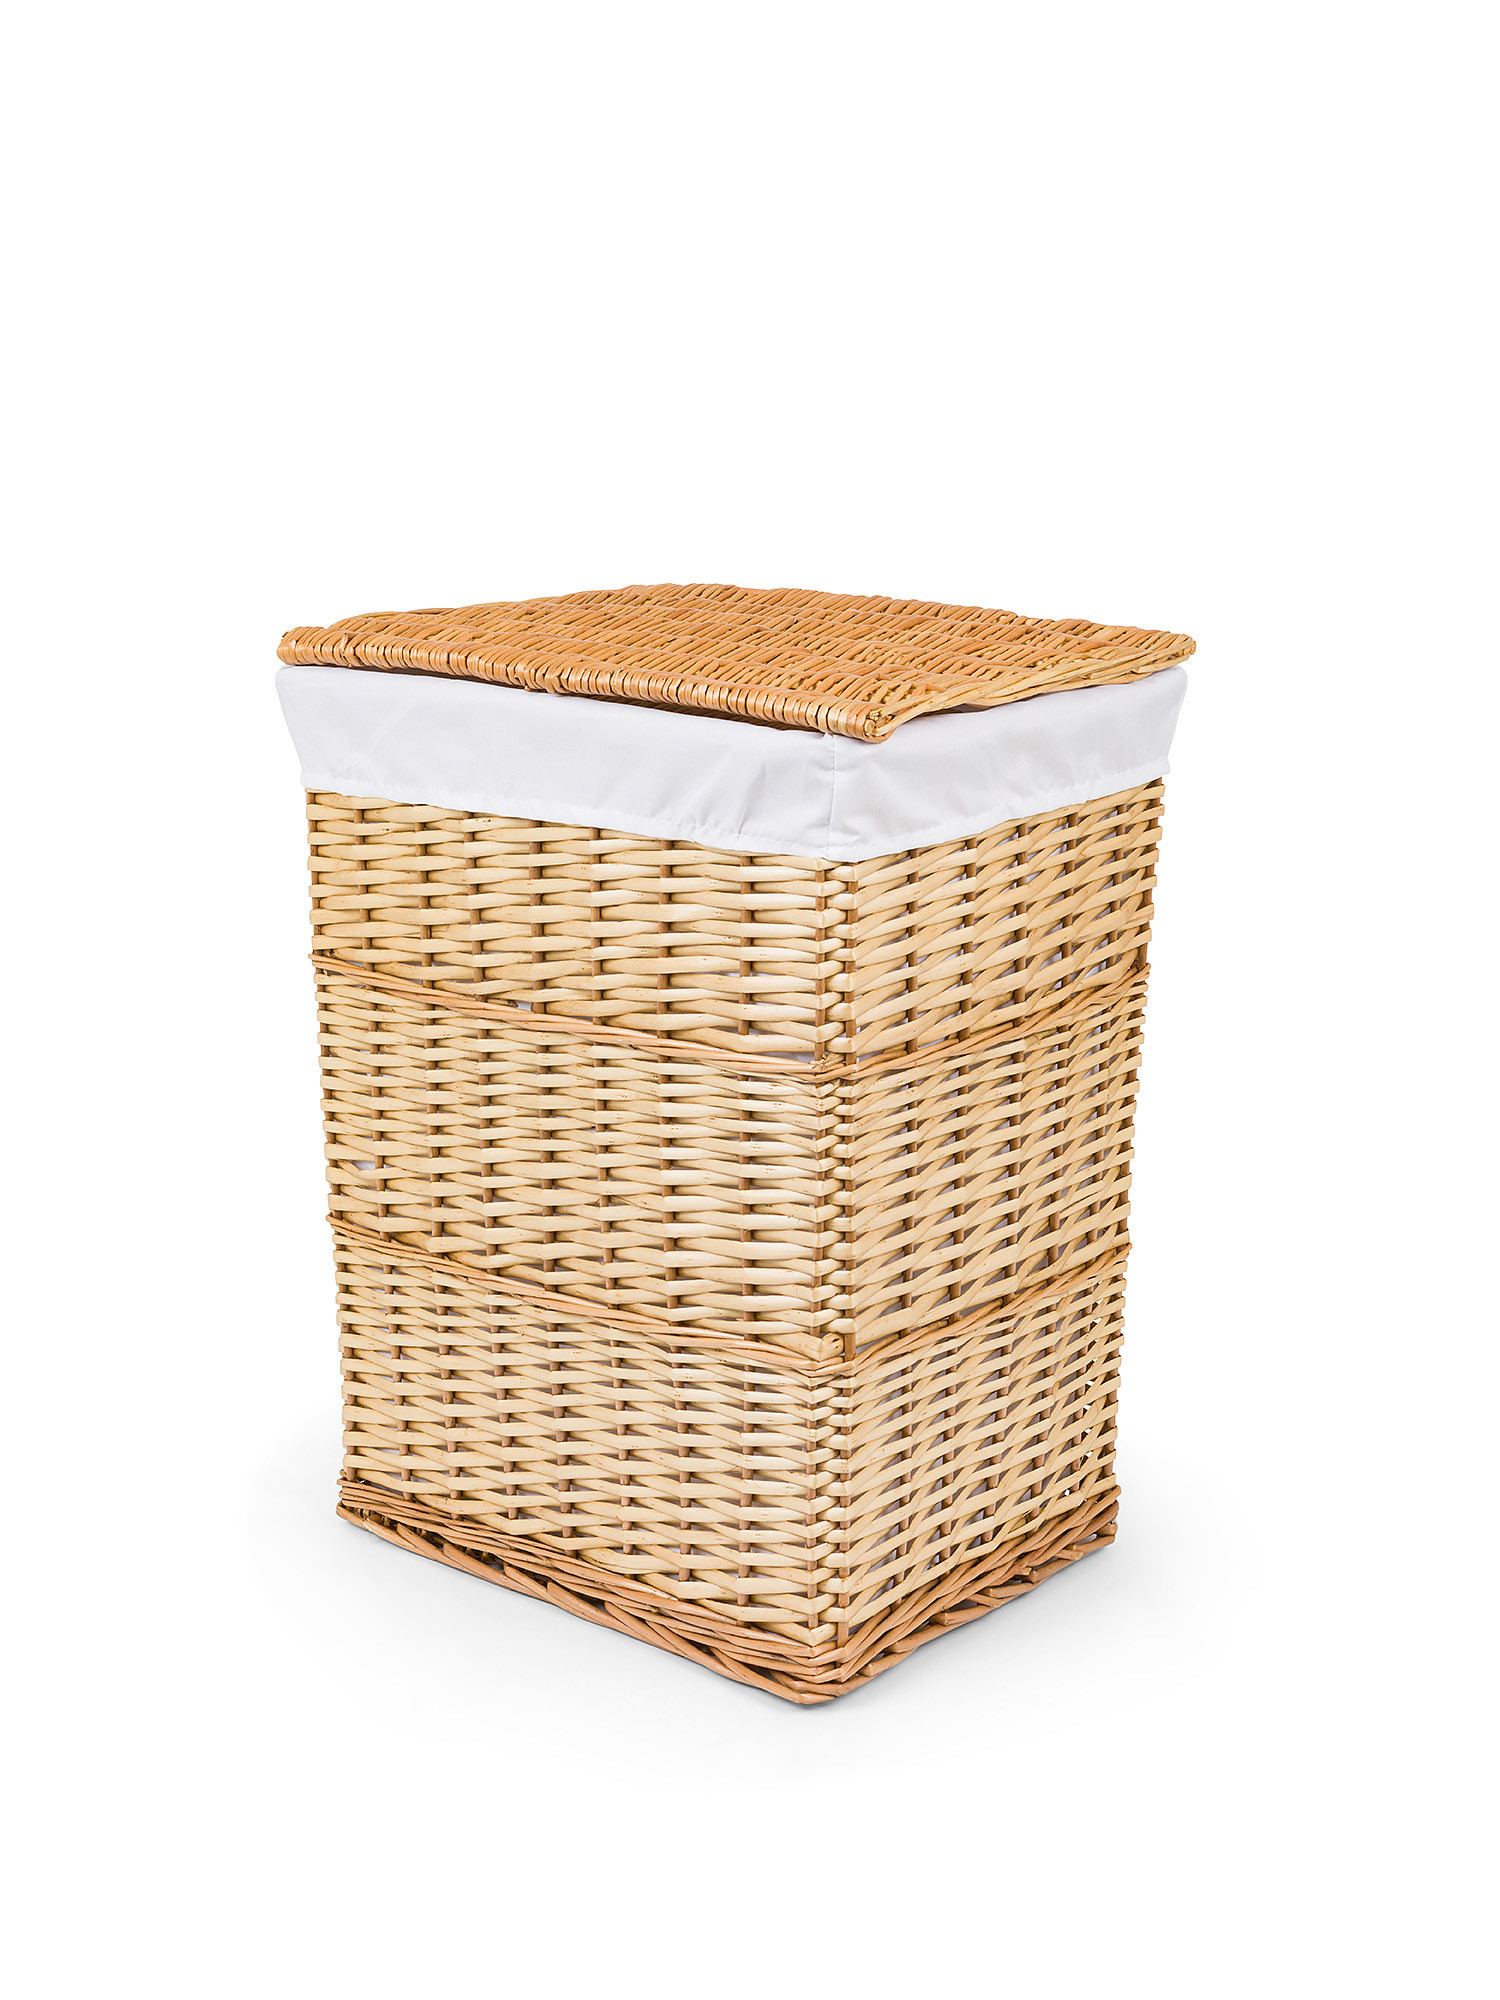 Wicker laundry basket with lining, Natural, large image number 0